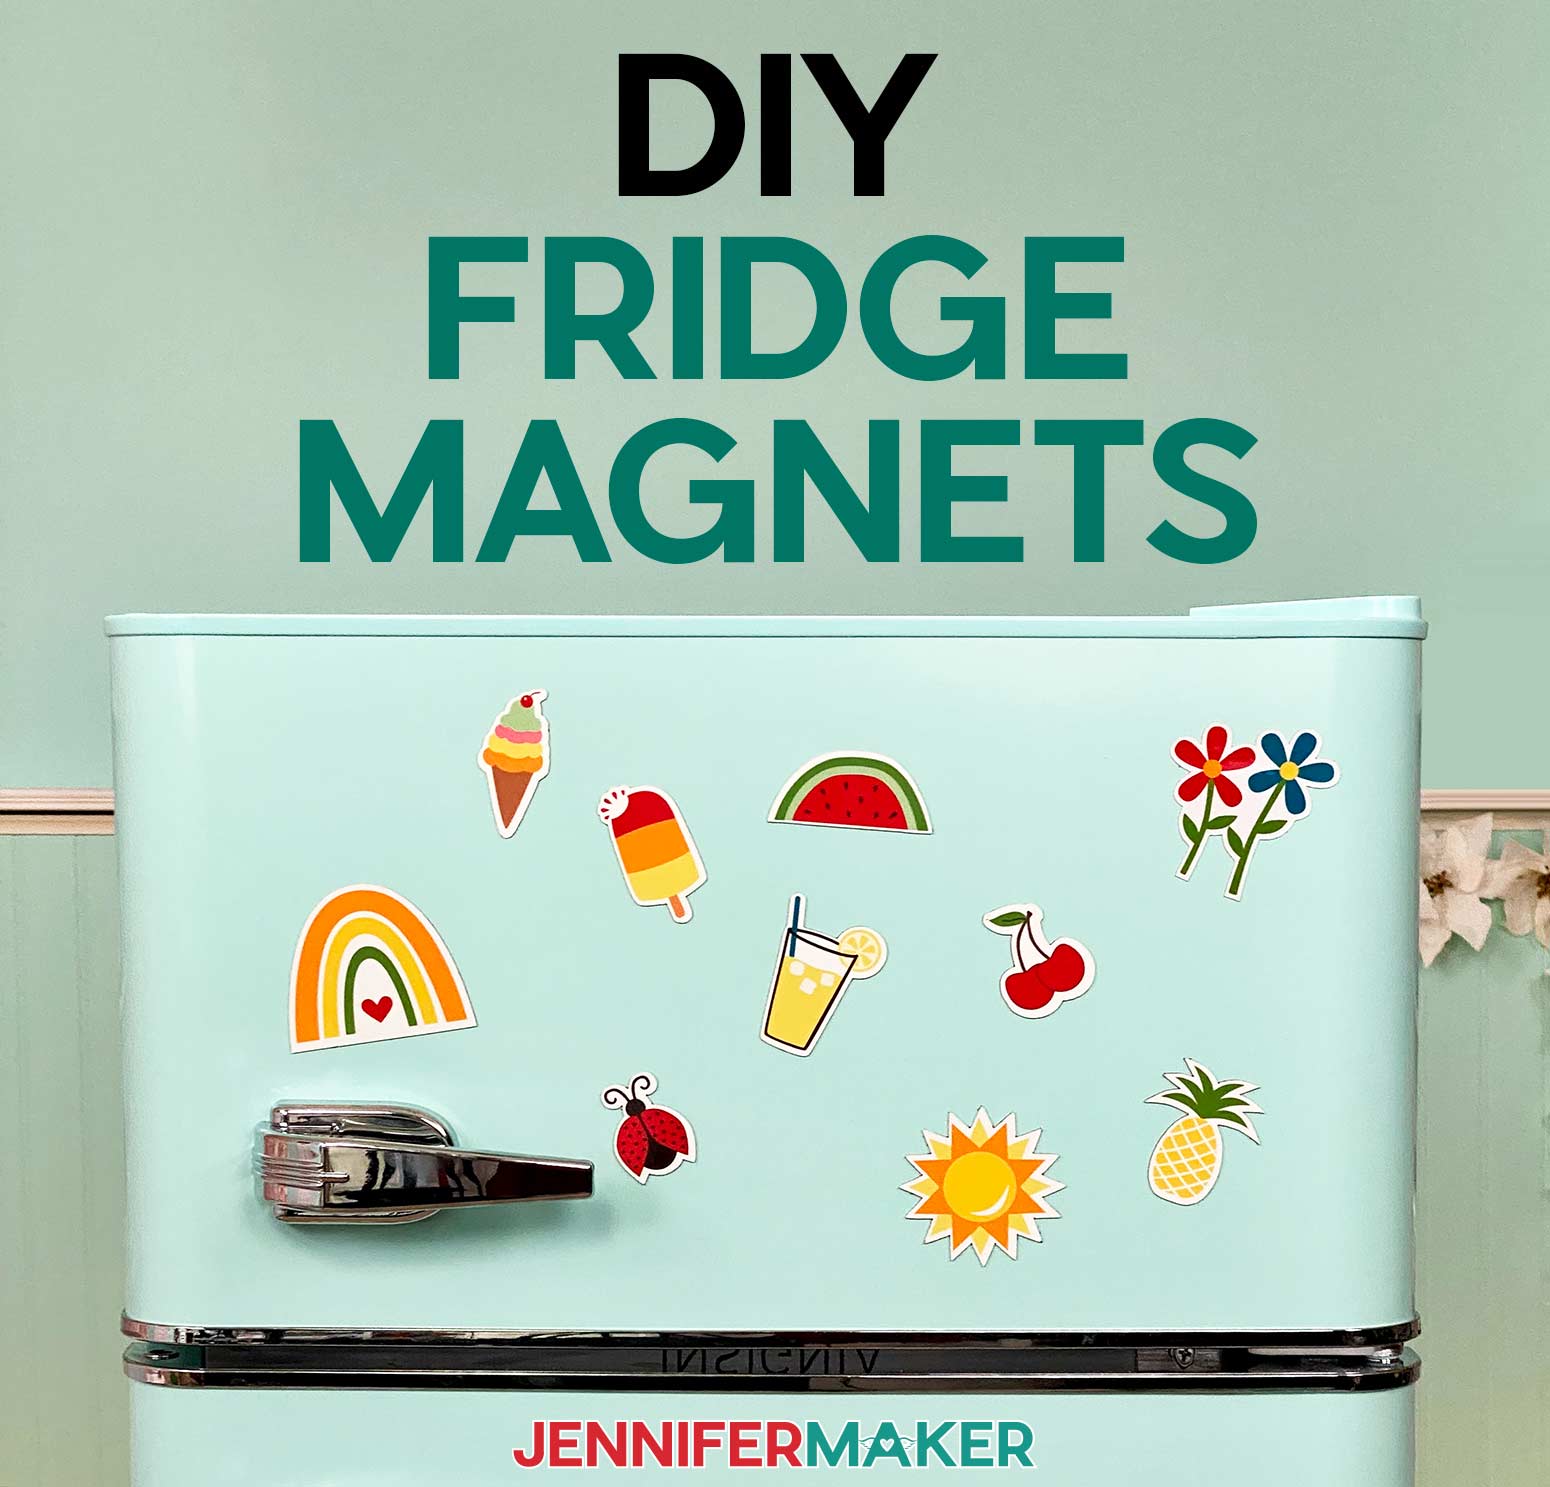 DIY fridge magnets with bright designs of fruits and summery flowers on a retro mint refrigerator.